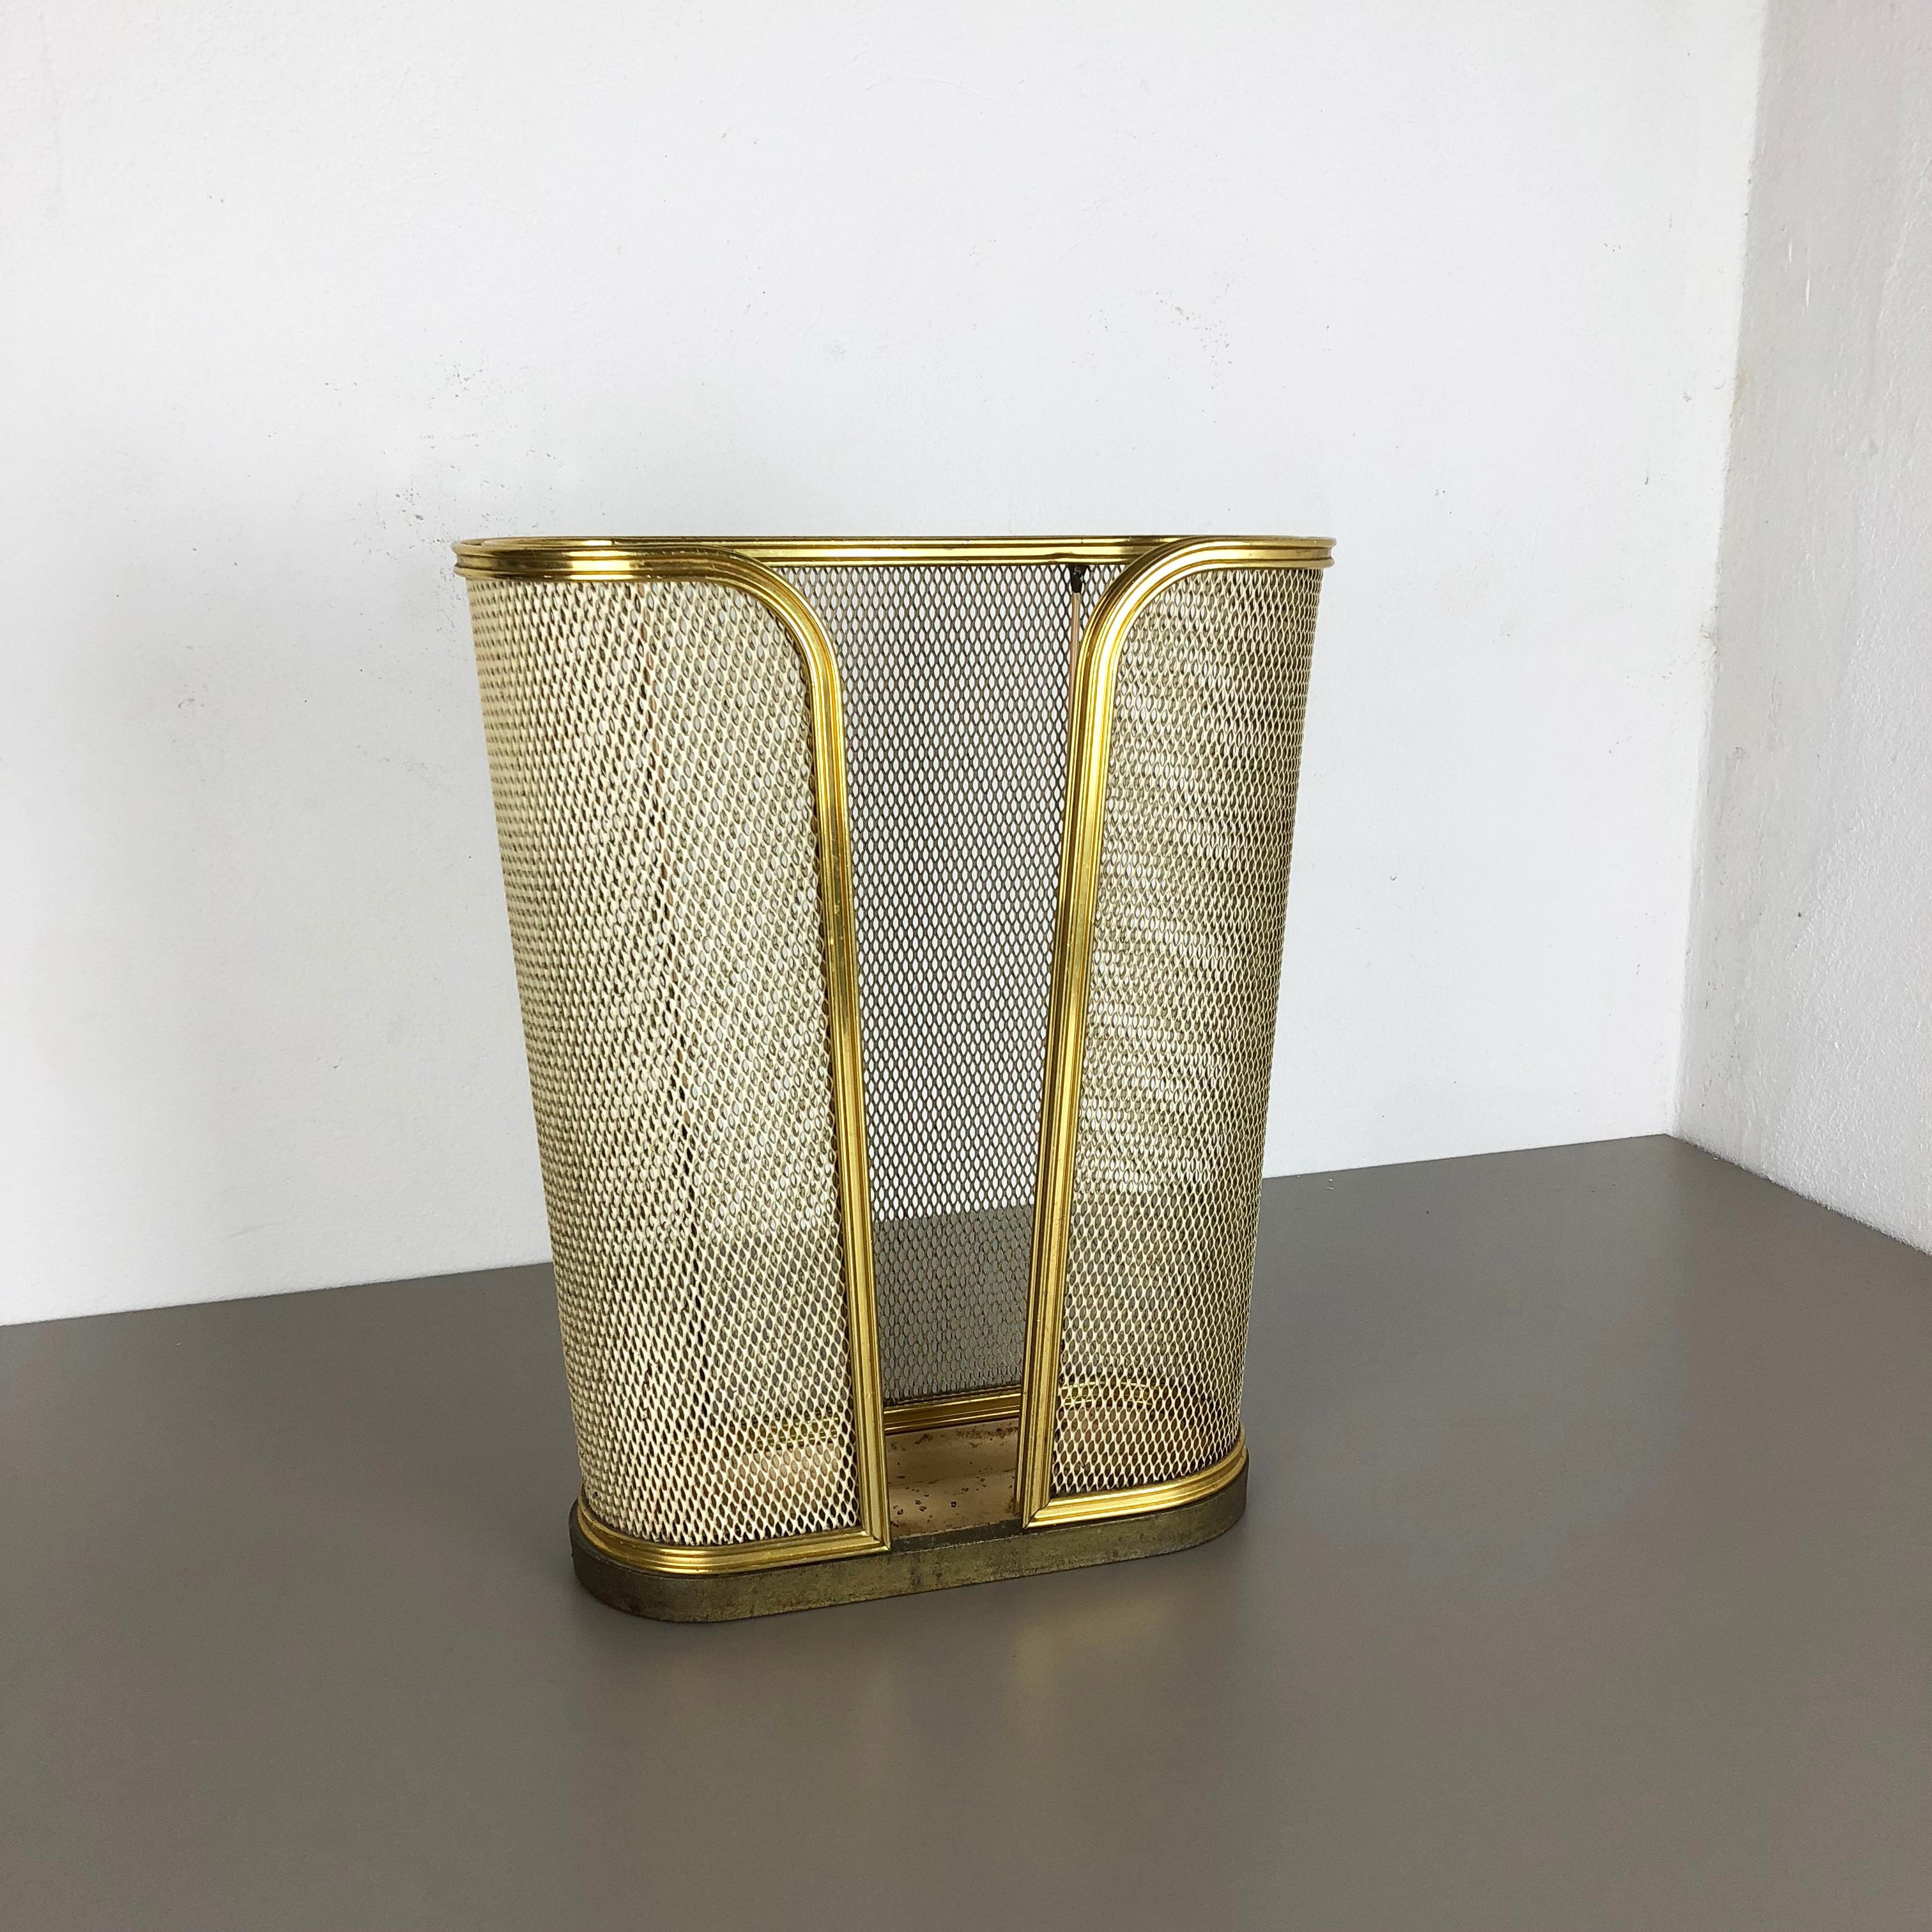 Article:

Bauhaus umbrella stand


Origin:

Germany


Age:

1950s


This original vintage Bauhaus style umbrella stand was produced in the 1950s in Germany. it is made of solid metal with brass applications at the top and bottom, and